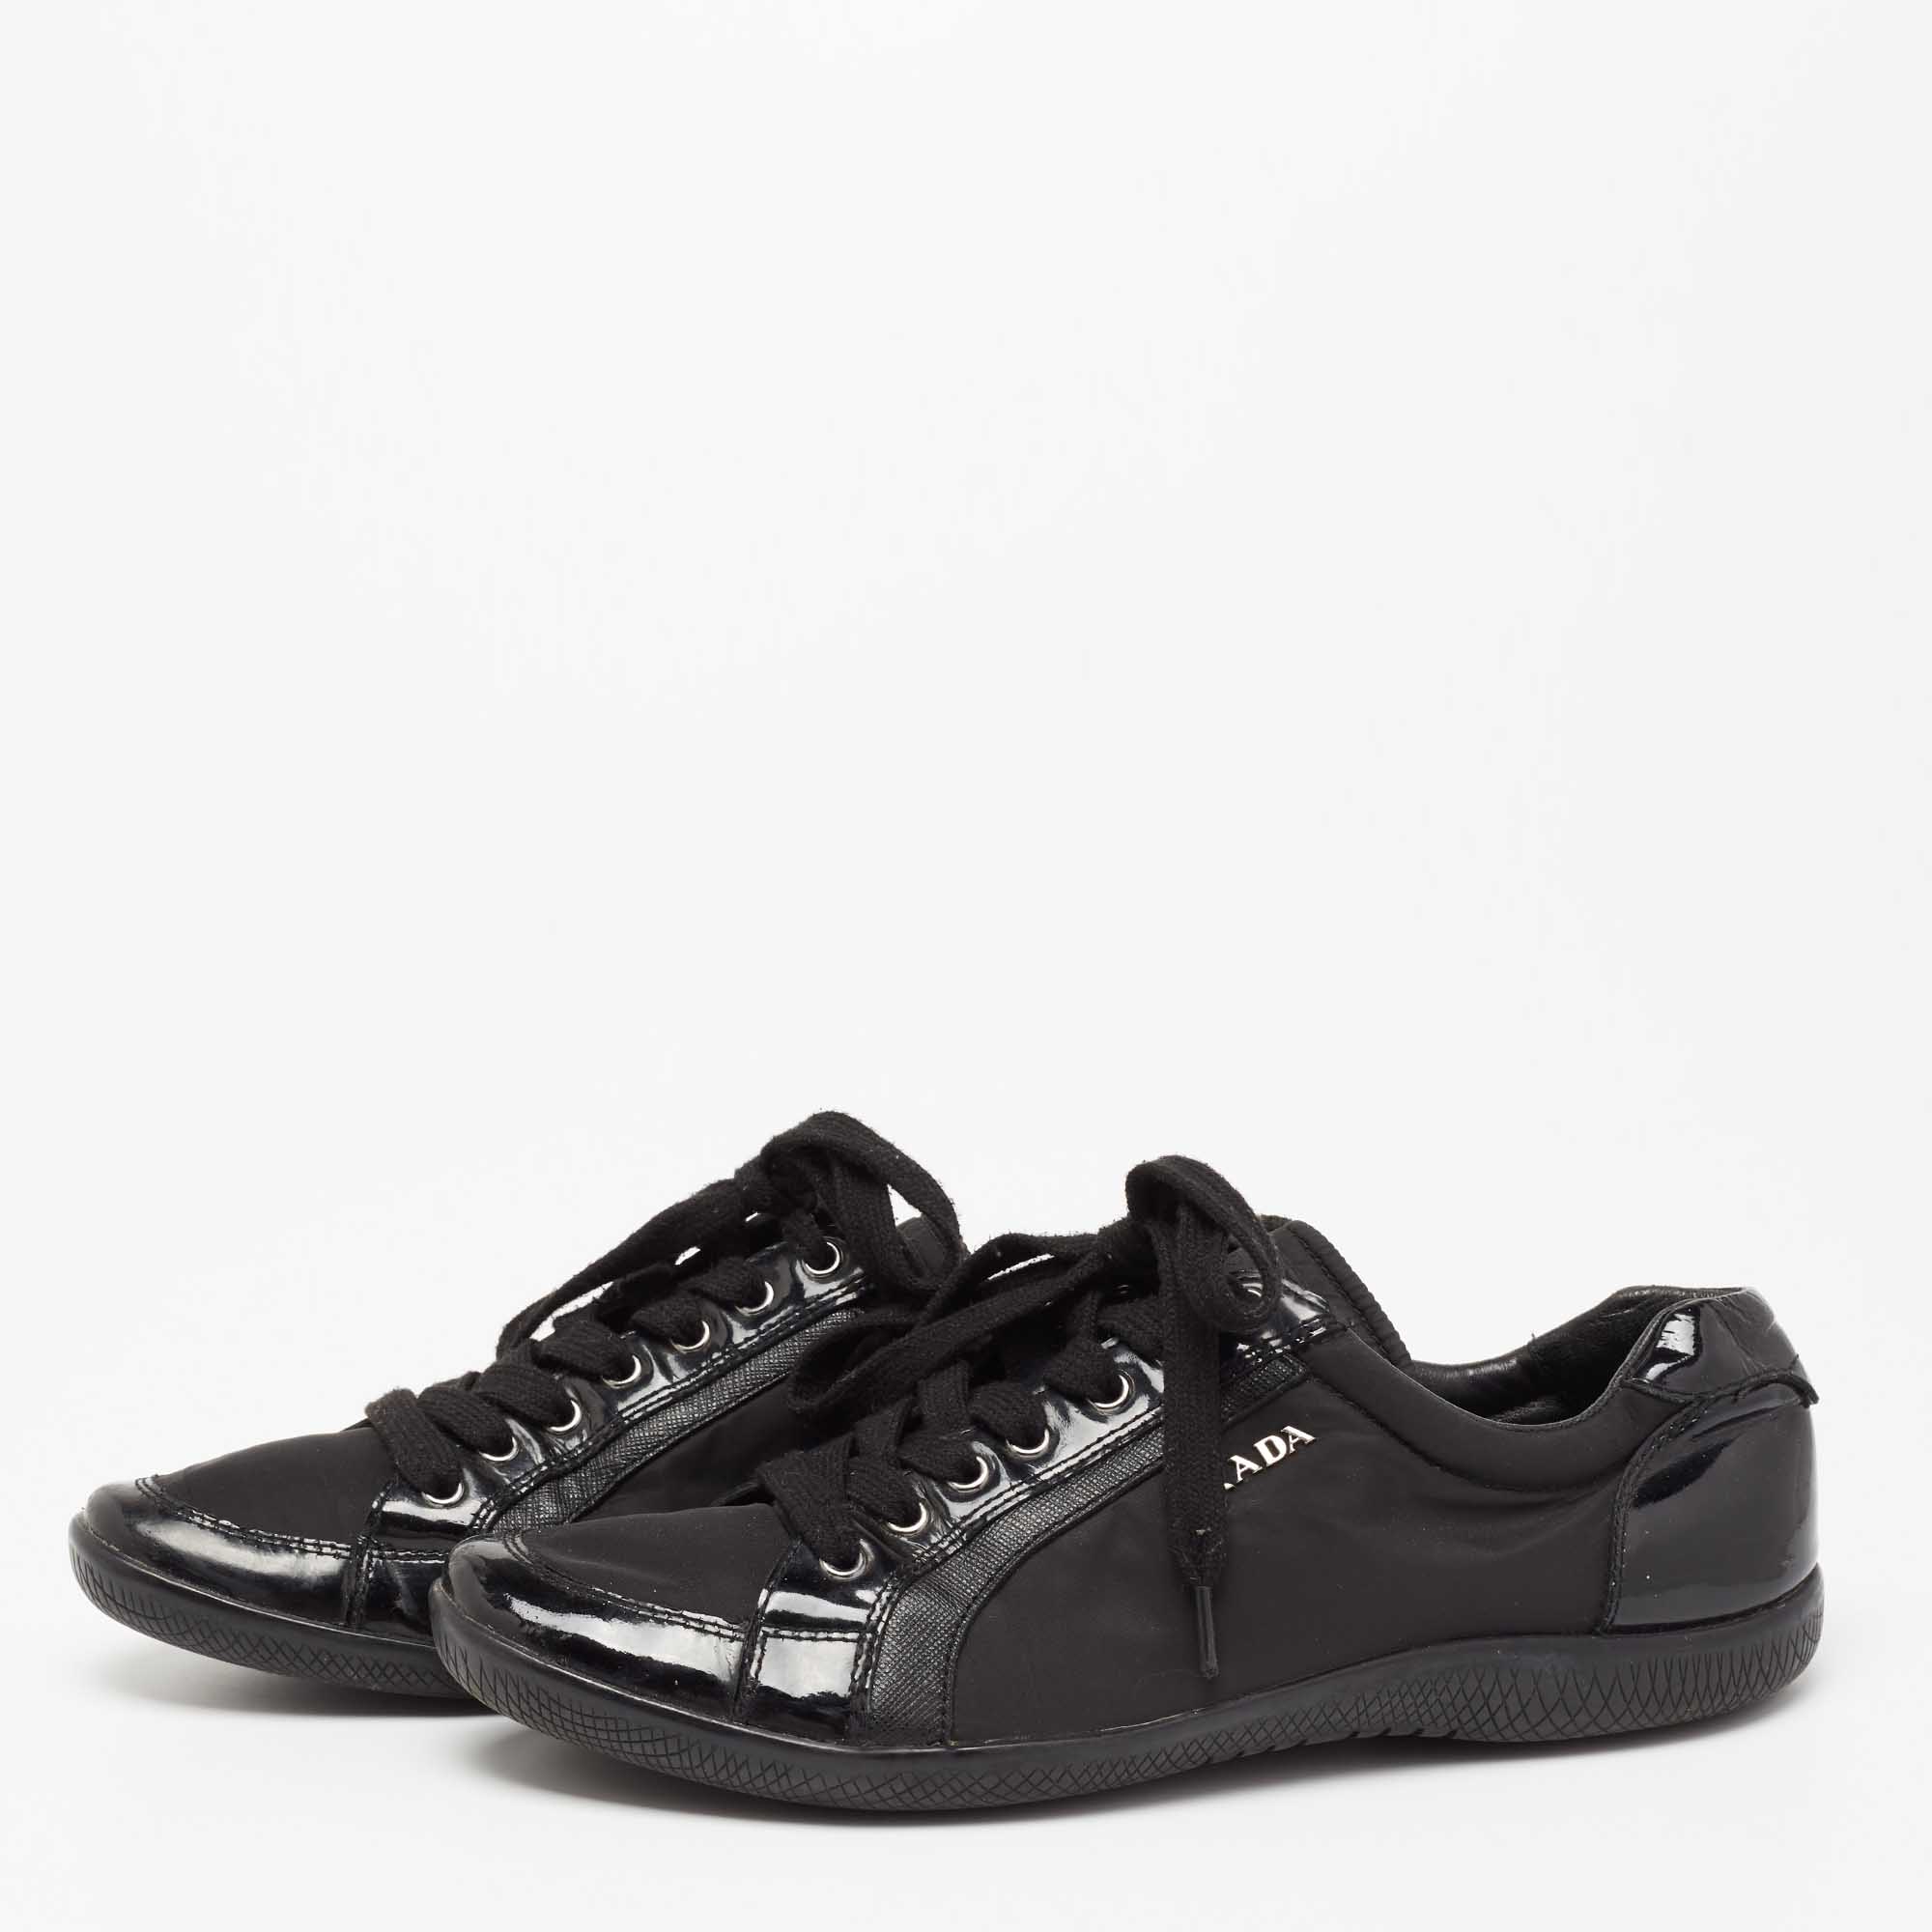 

Prada Sport Black Patent Leather and Neoprene Low-Top Sneakers Size